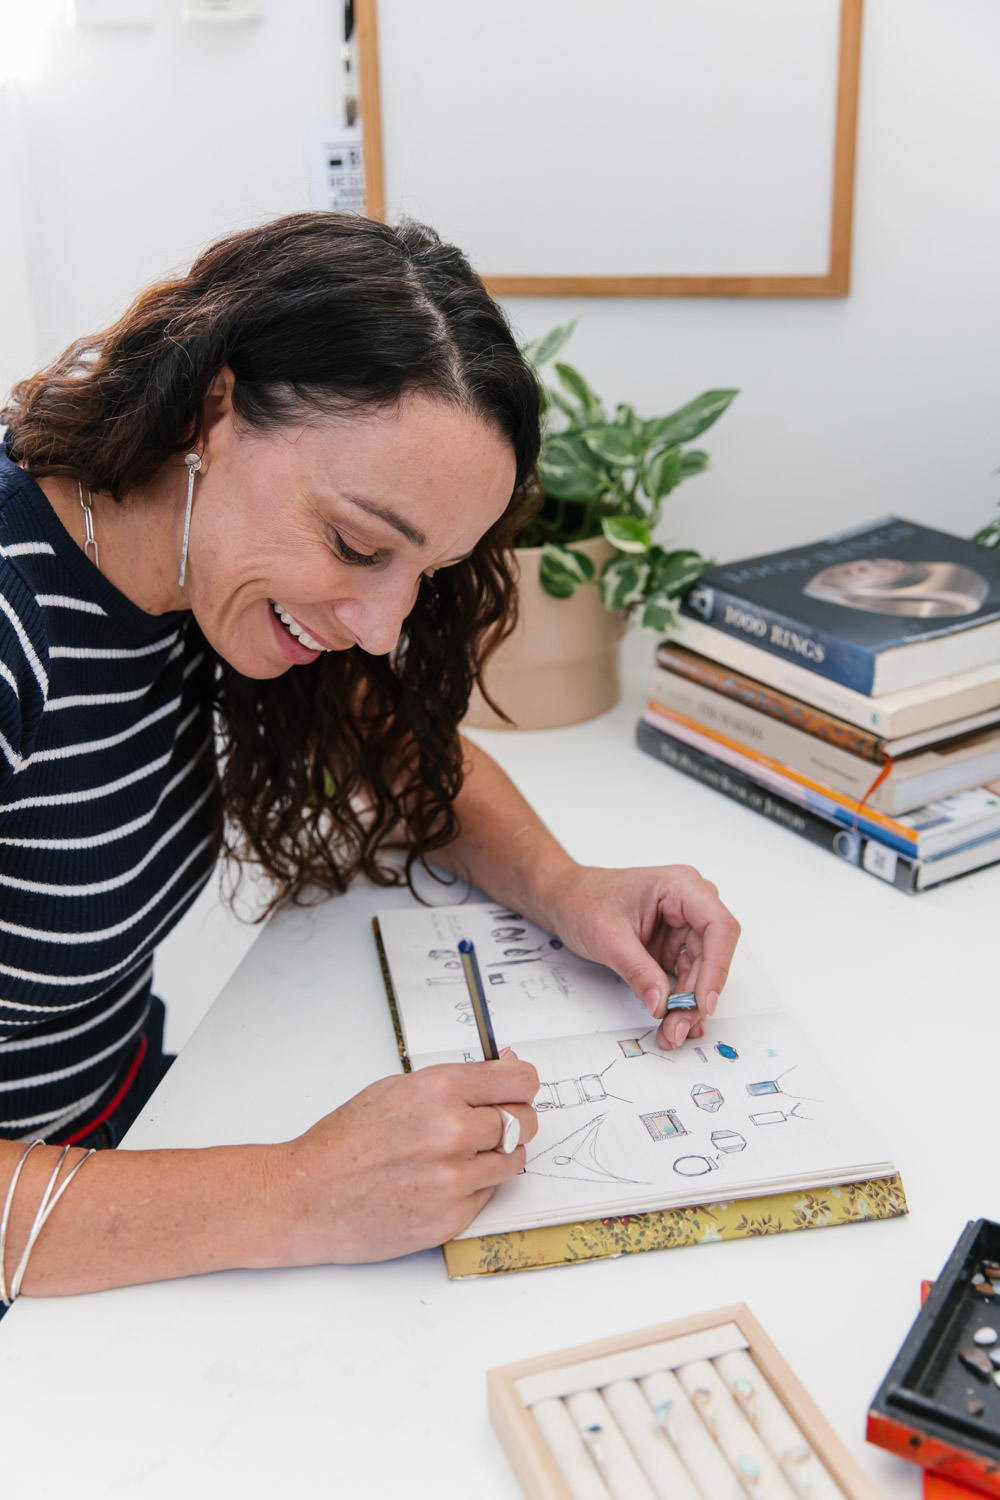 A white women with curly brown hair sits at her desk sketching jewellery design ideas